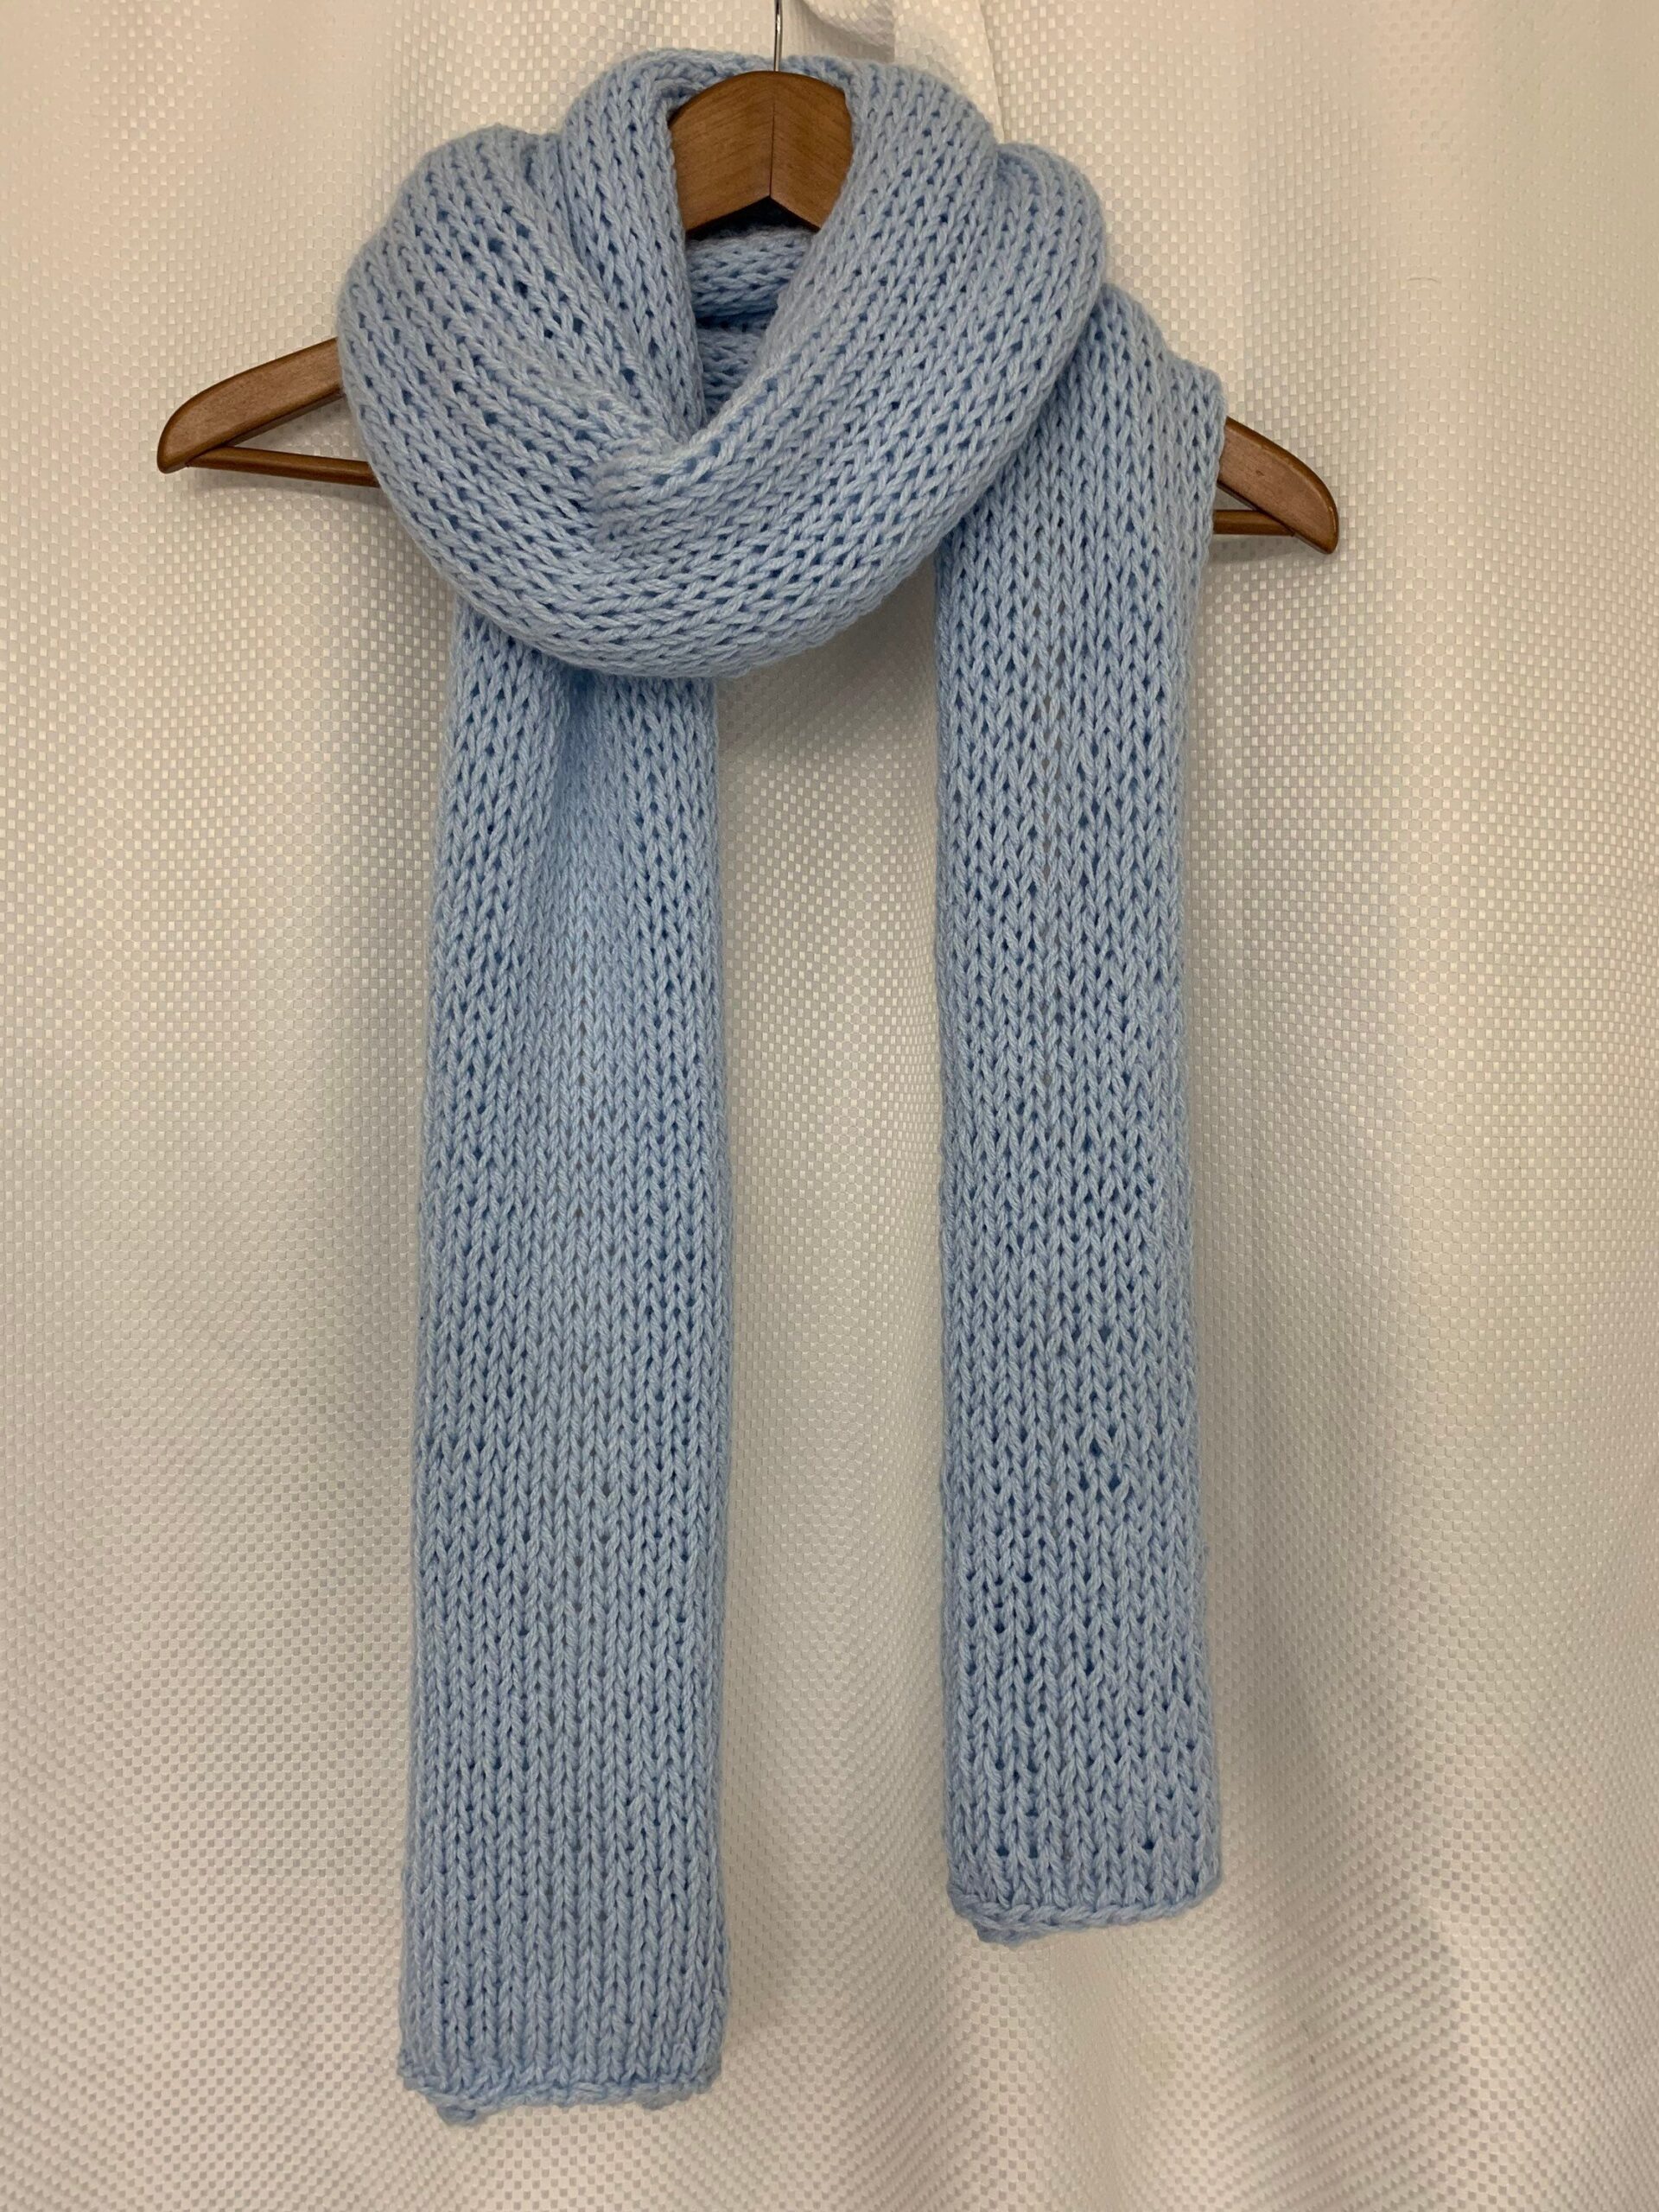 Fashionable blue scarfs for a beautiful
look